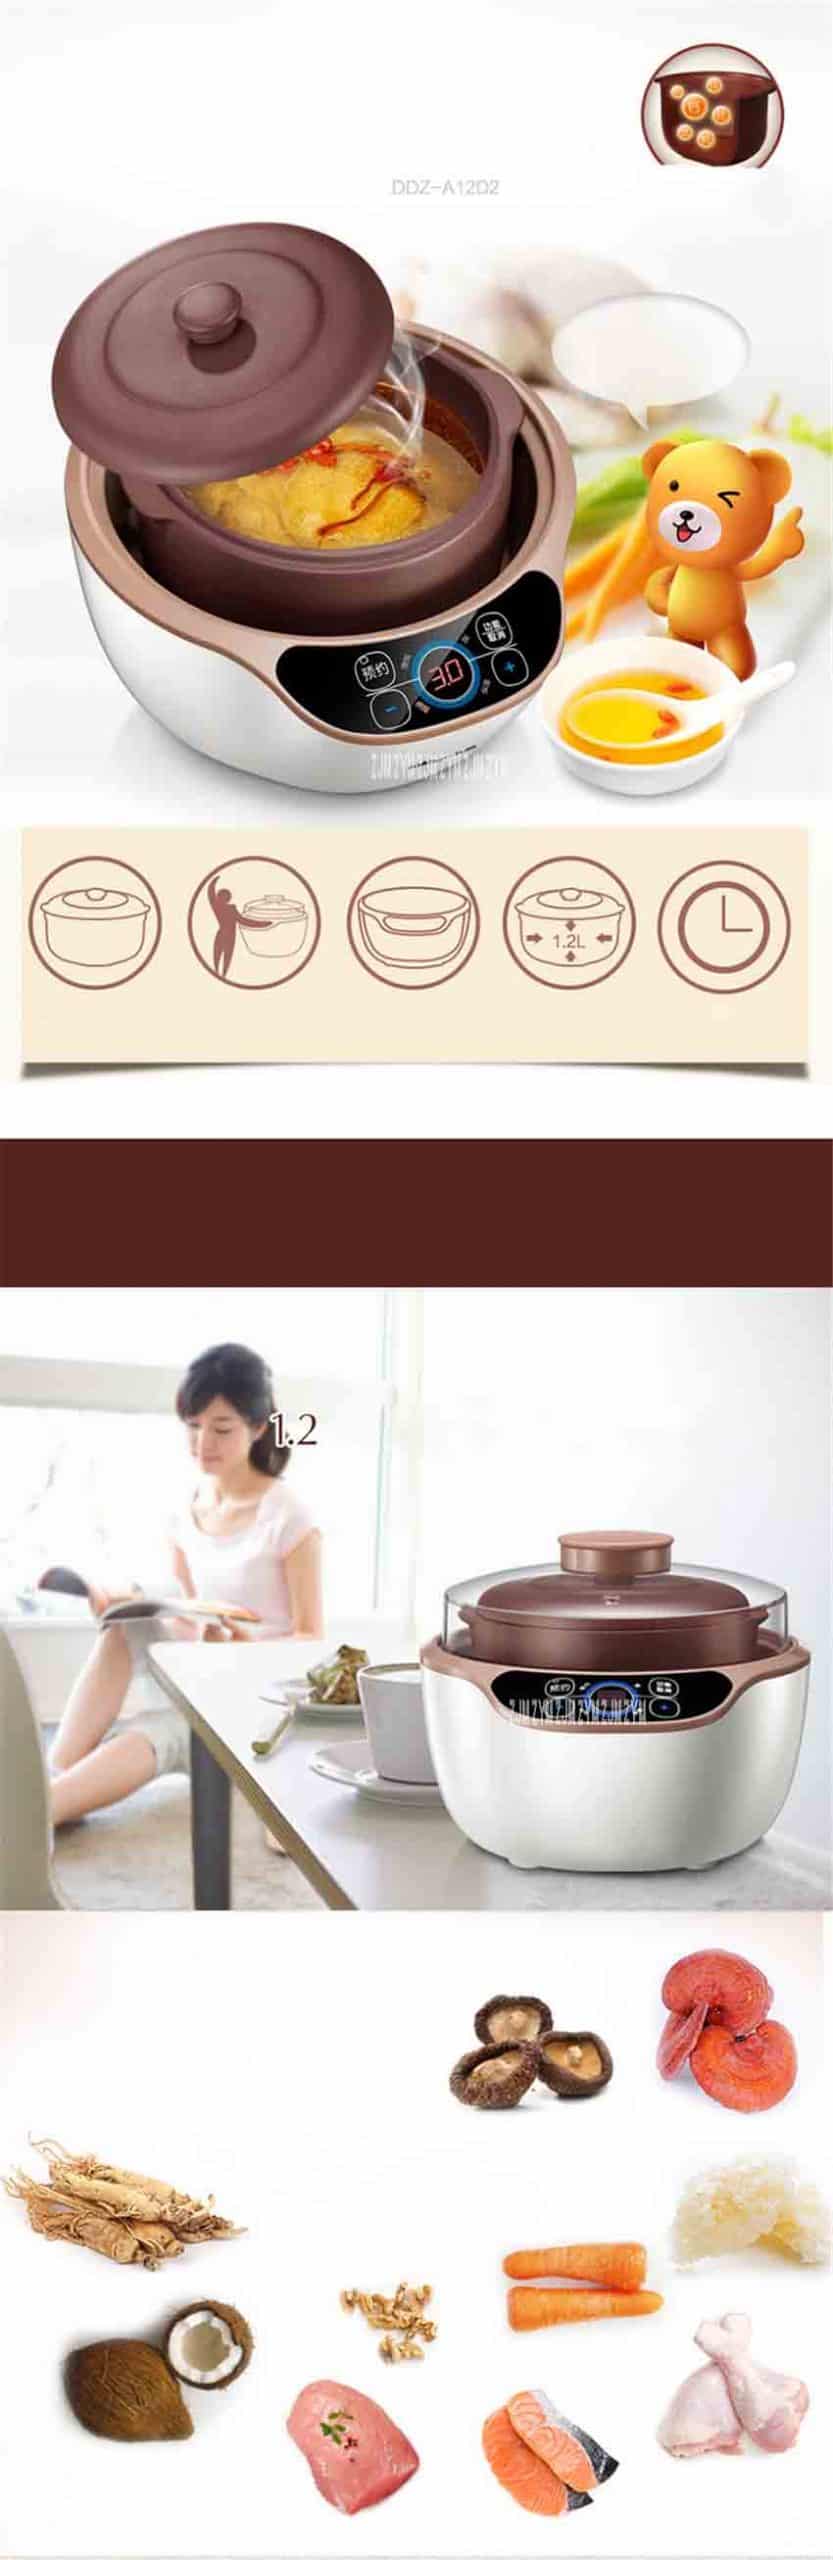 220V/50Hz Automatic Baby Porridge Cooker Electric Slow Cooker Purple Clay Material 1.2L Capacity DDZ-A12D2 Kitchen Multi Cookers